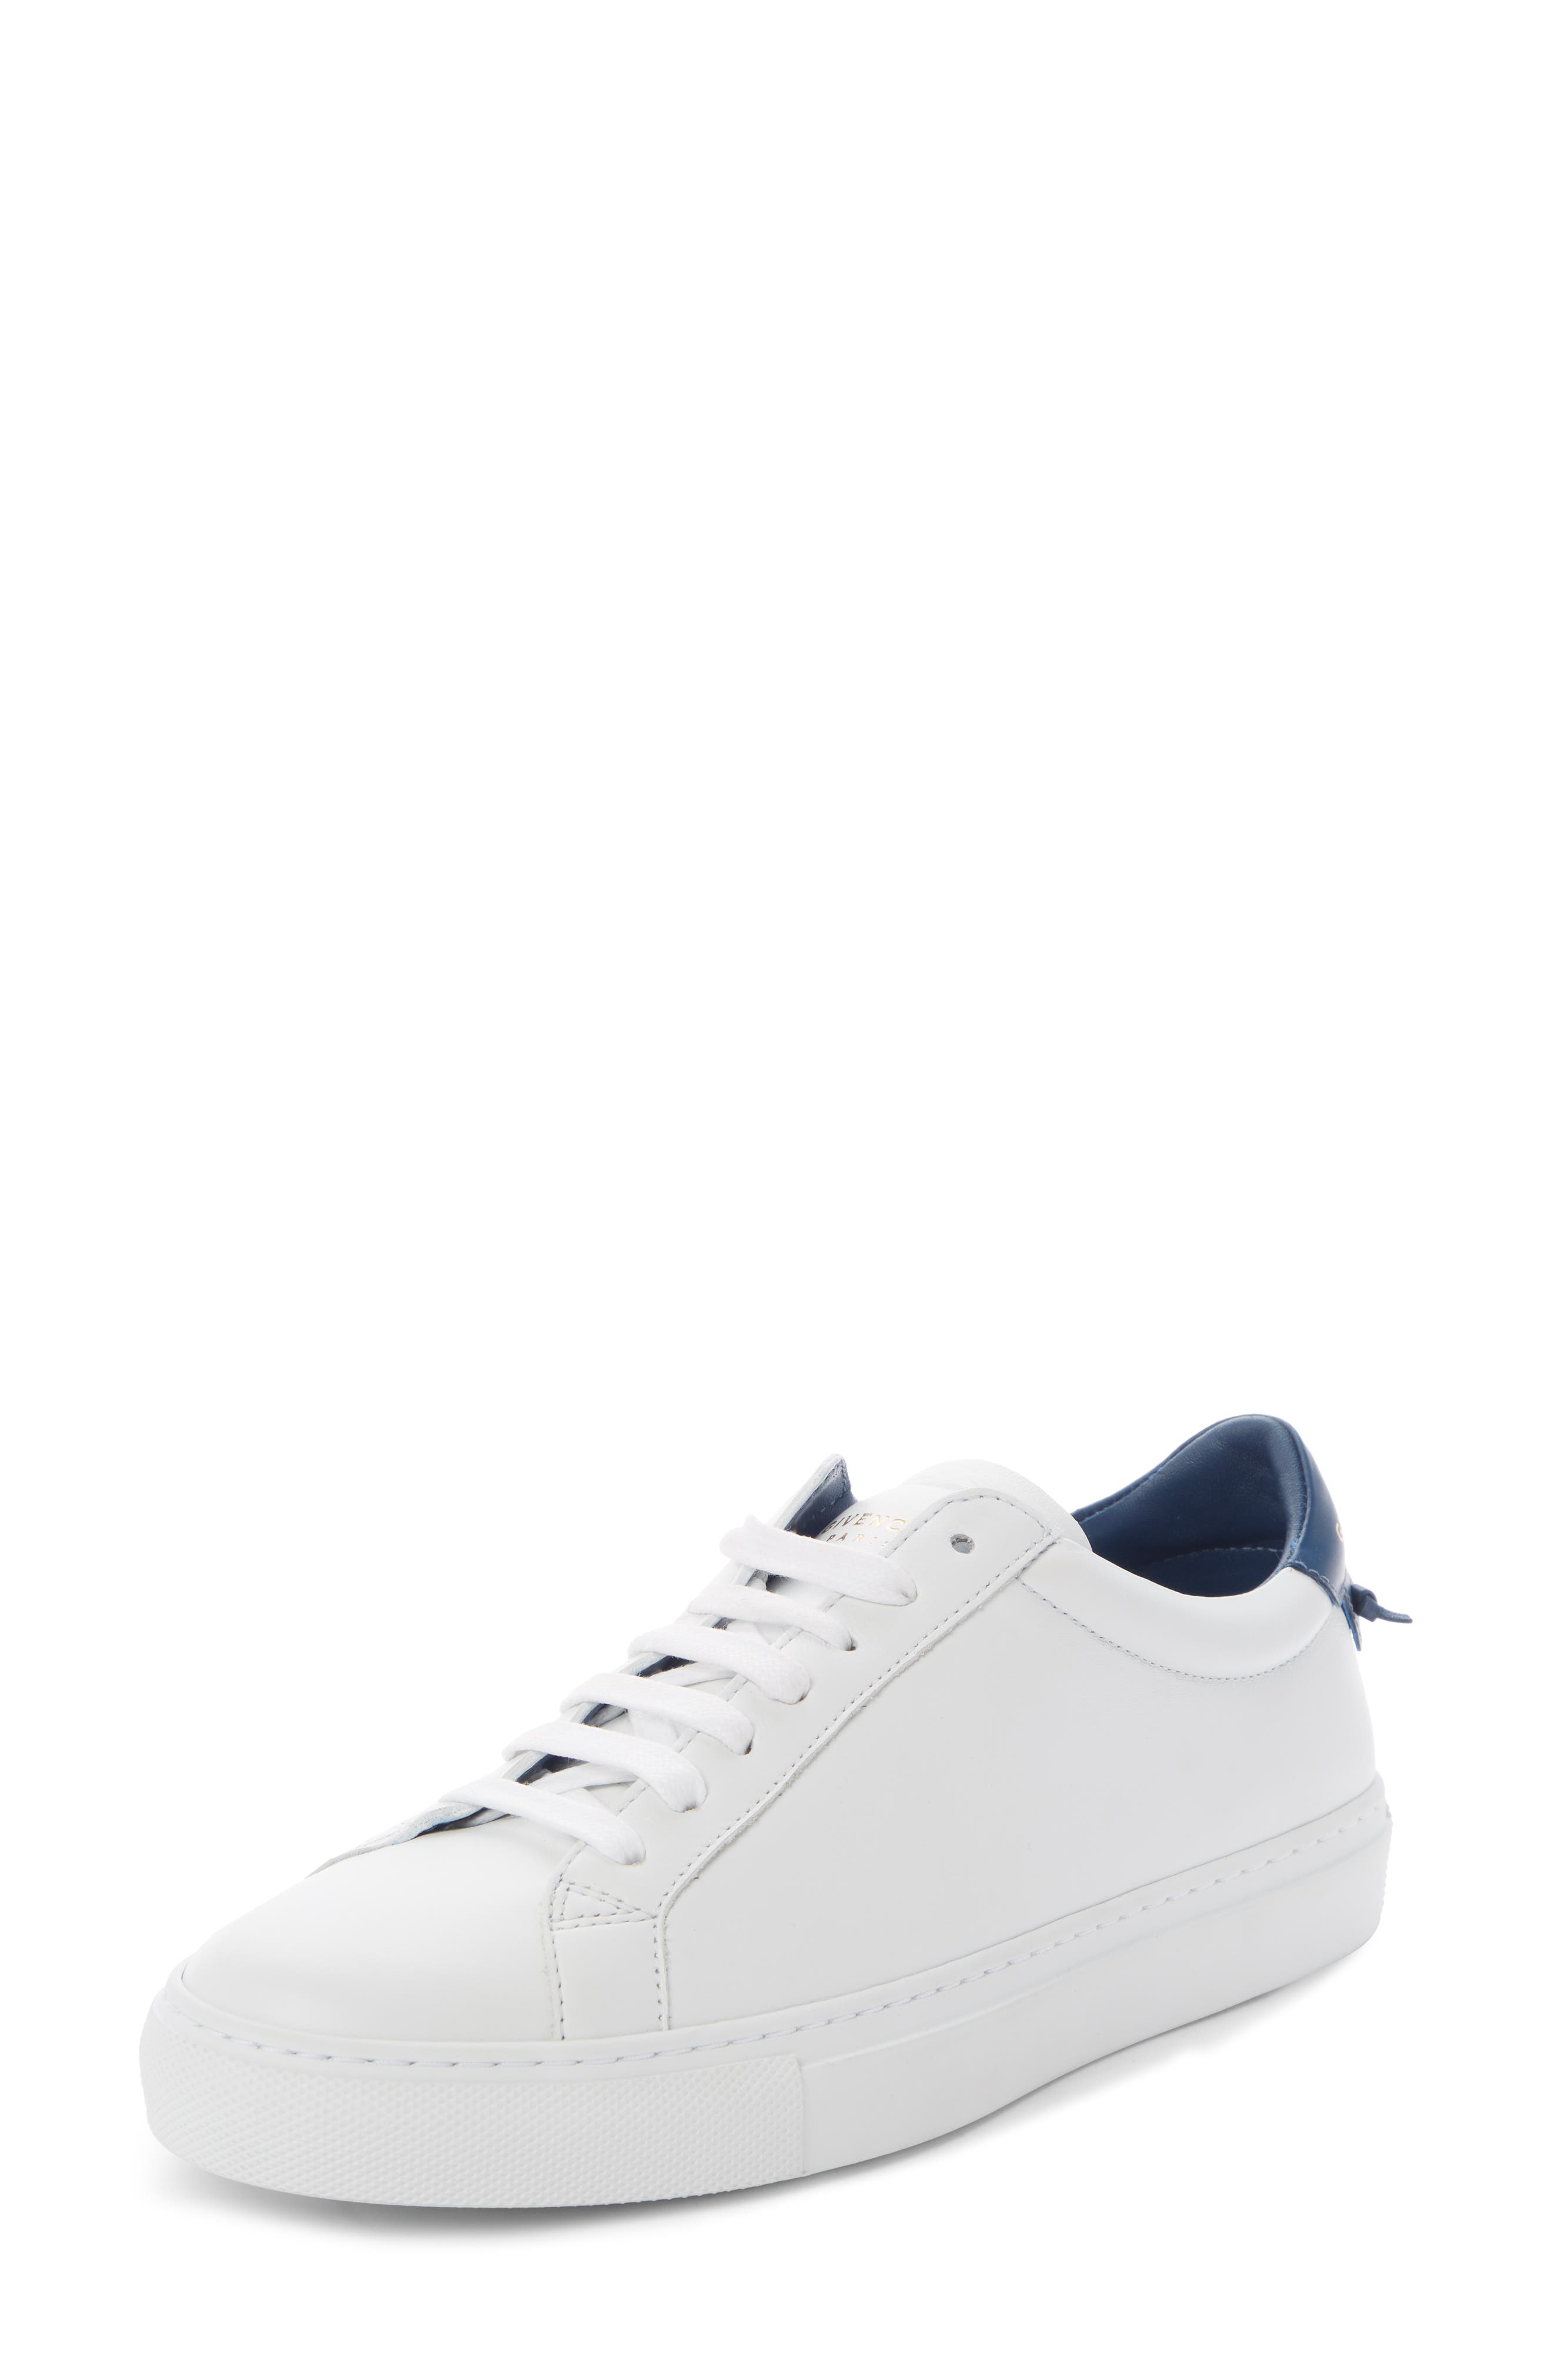 nordstrom givenchy sneakers